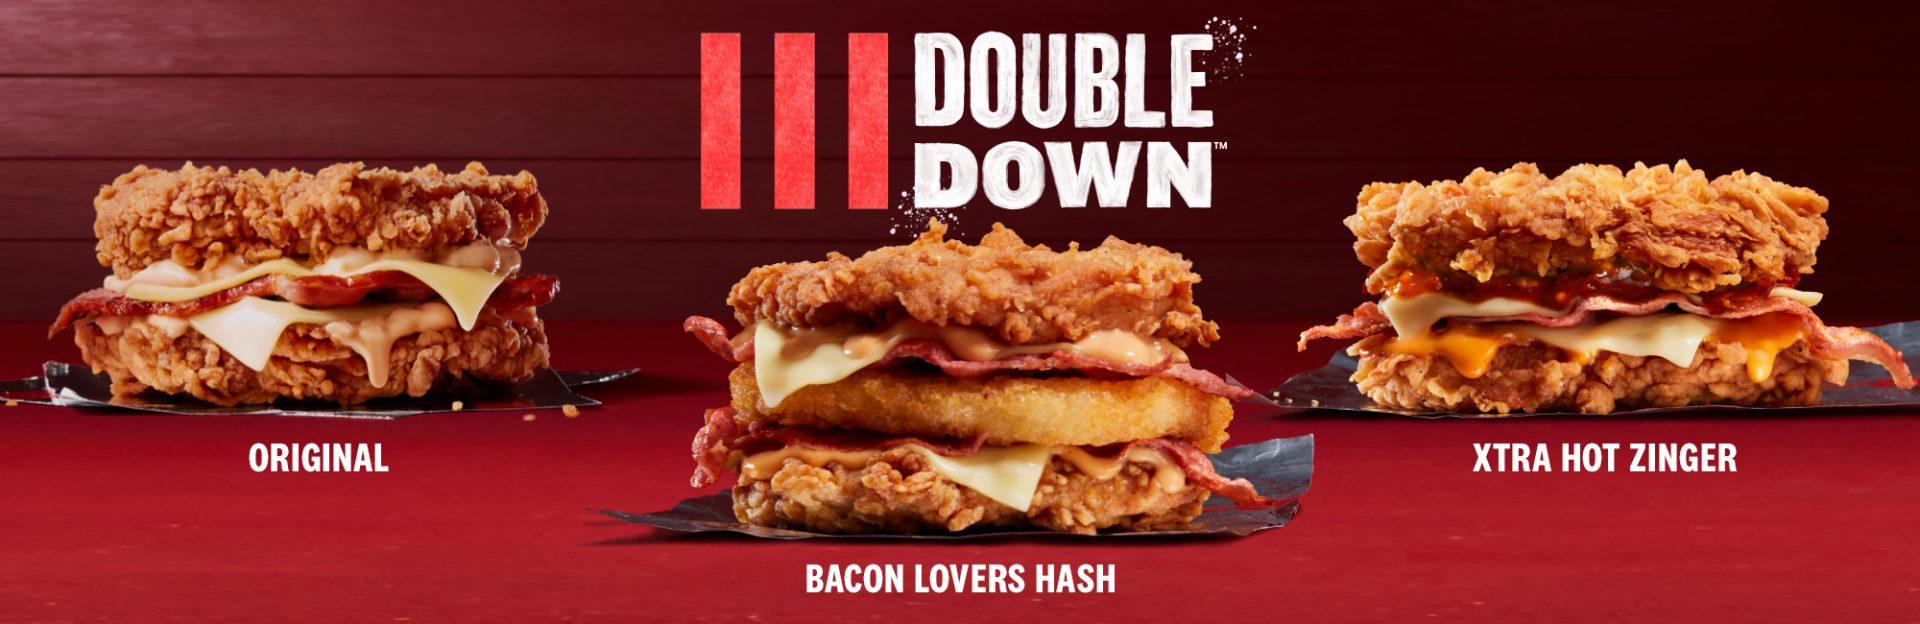 NEWS: KFC Double Down is back in New Zealand (Original, Zinger Chipotle